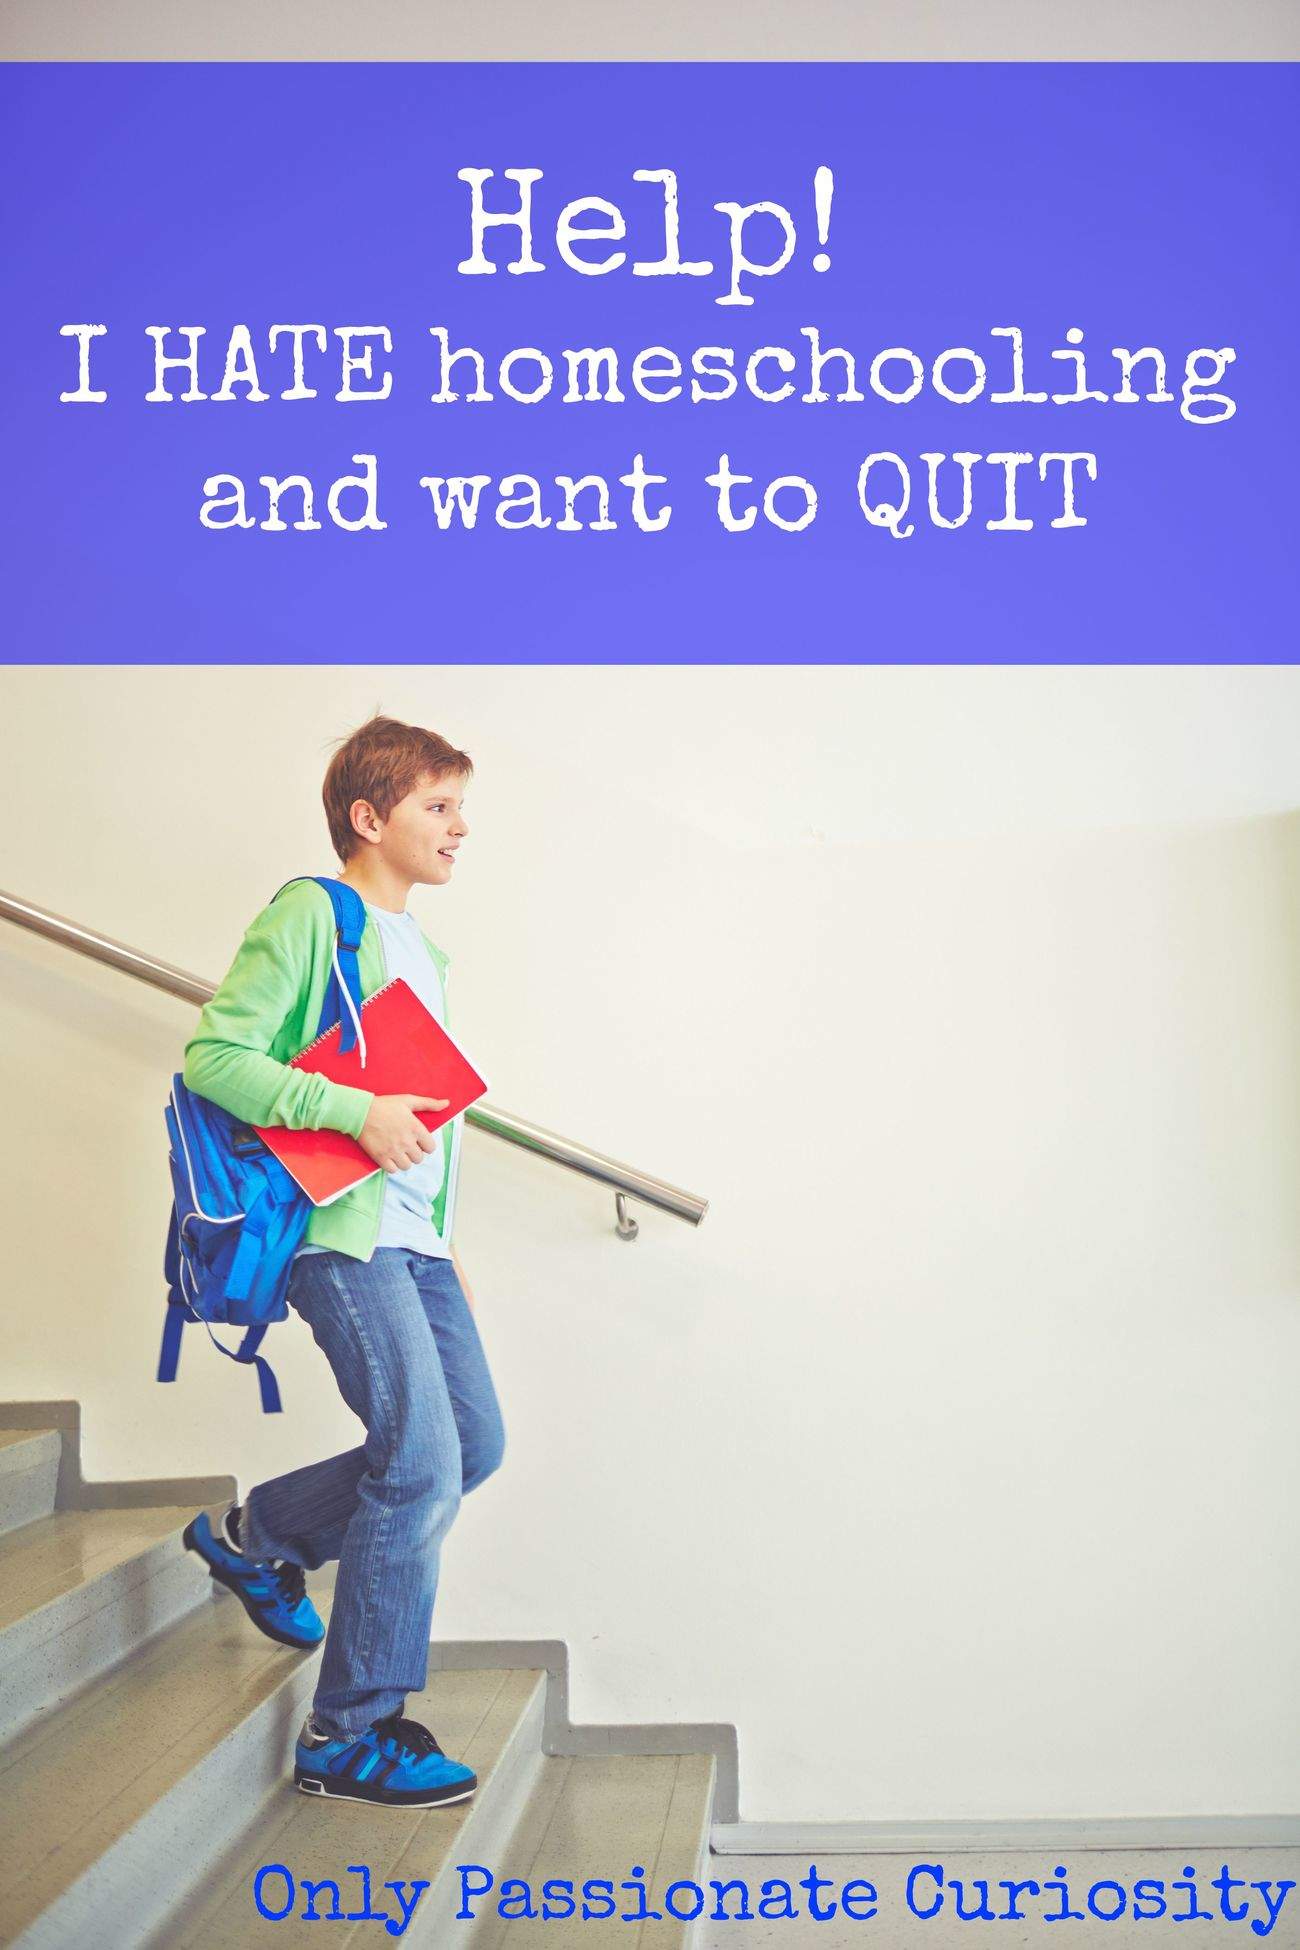 So you REALLY want to quit homeschooling